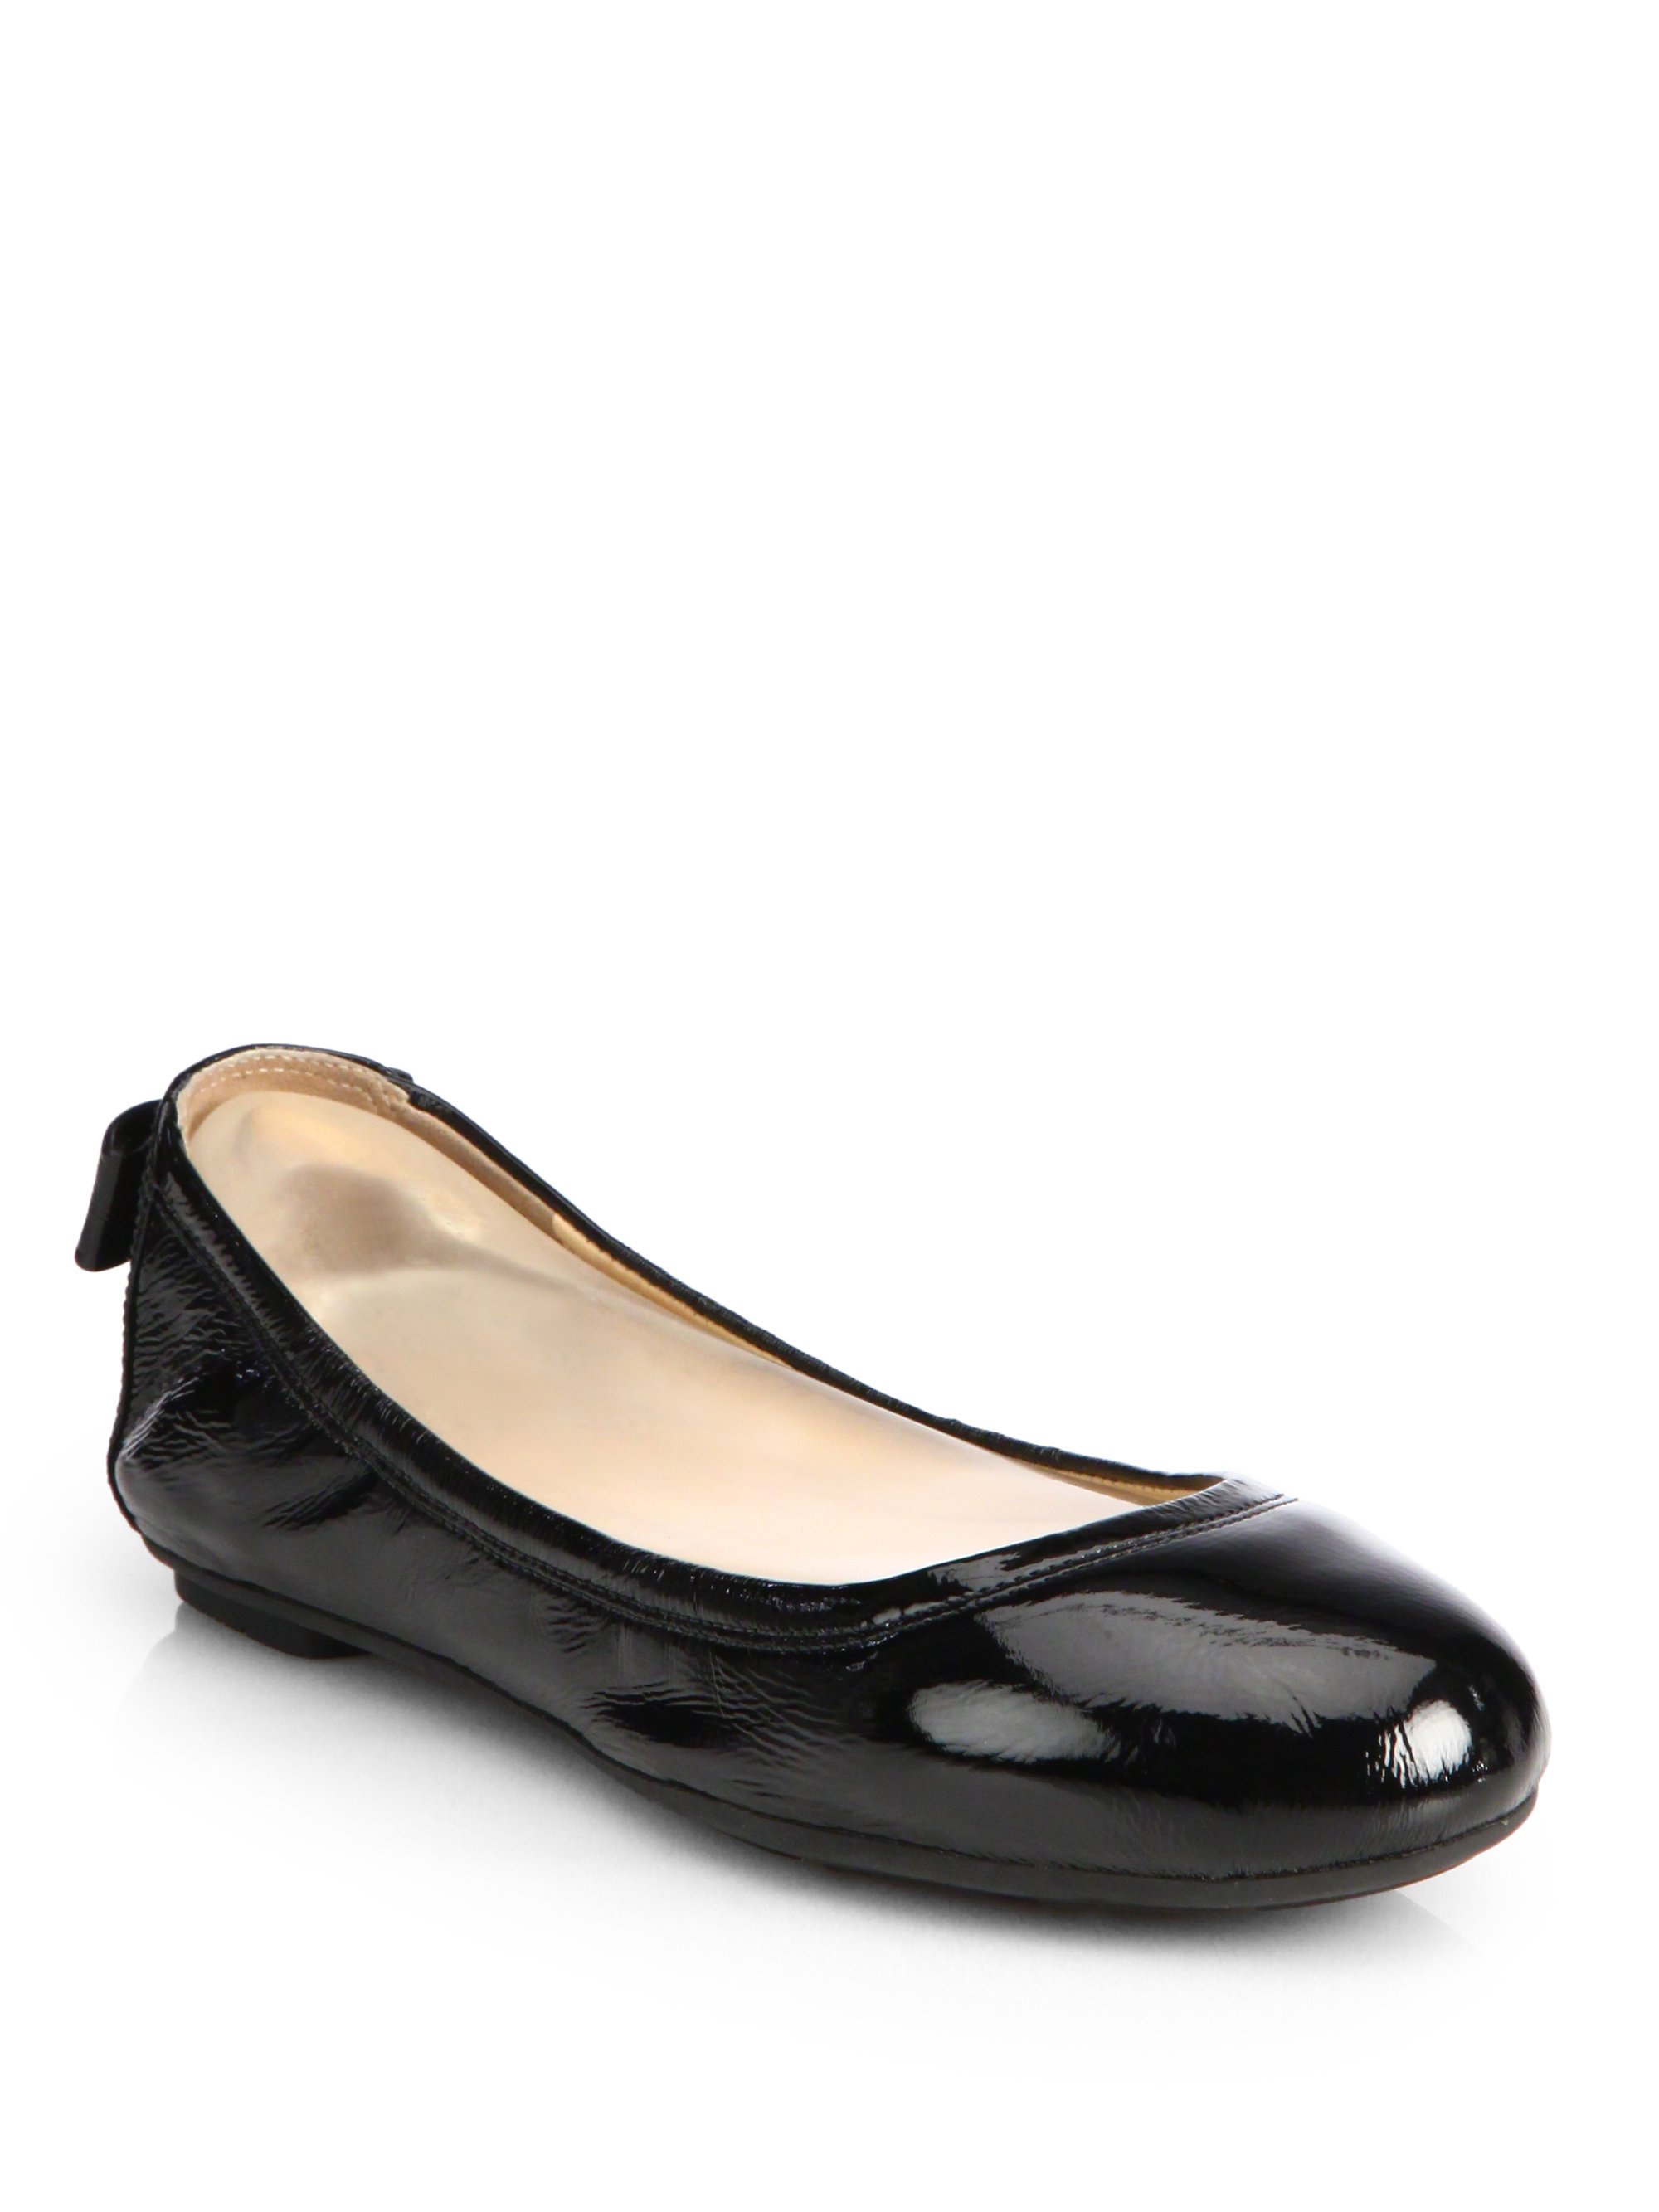 cole haan black manhattan patent leather ballet flats product 1 17151687 0 895319325 normal